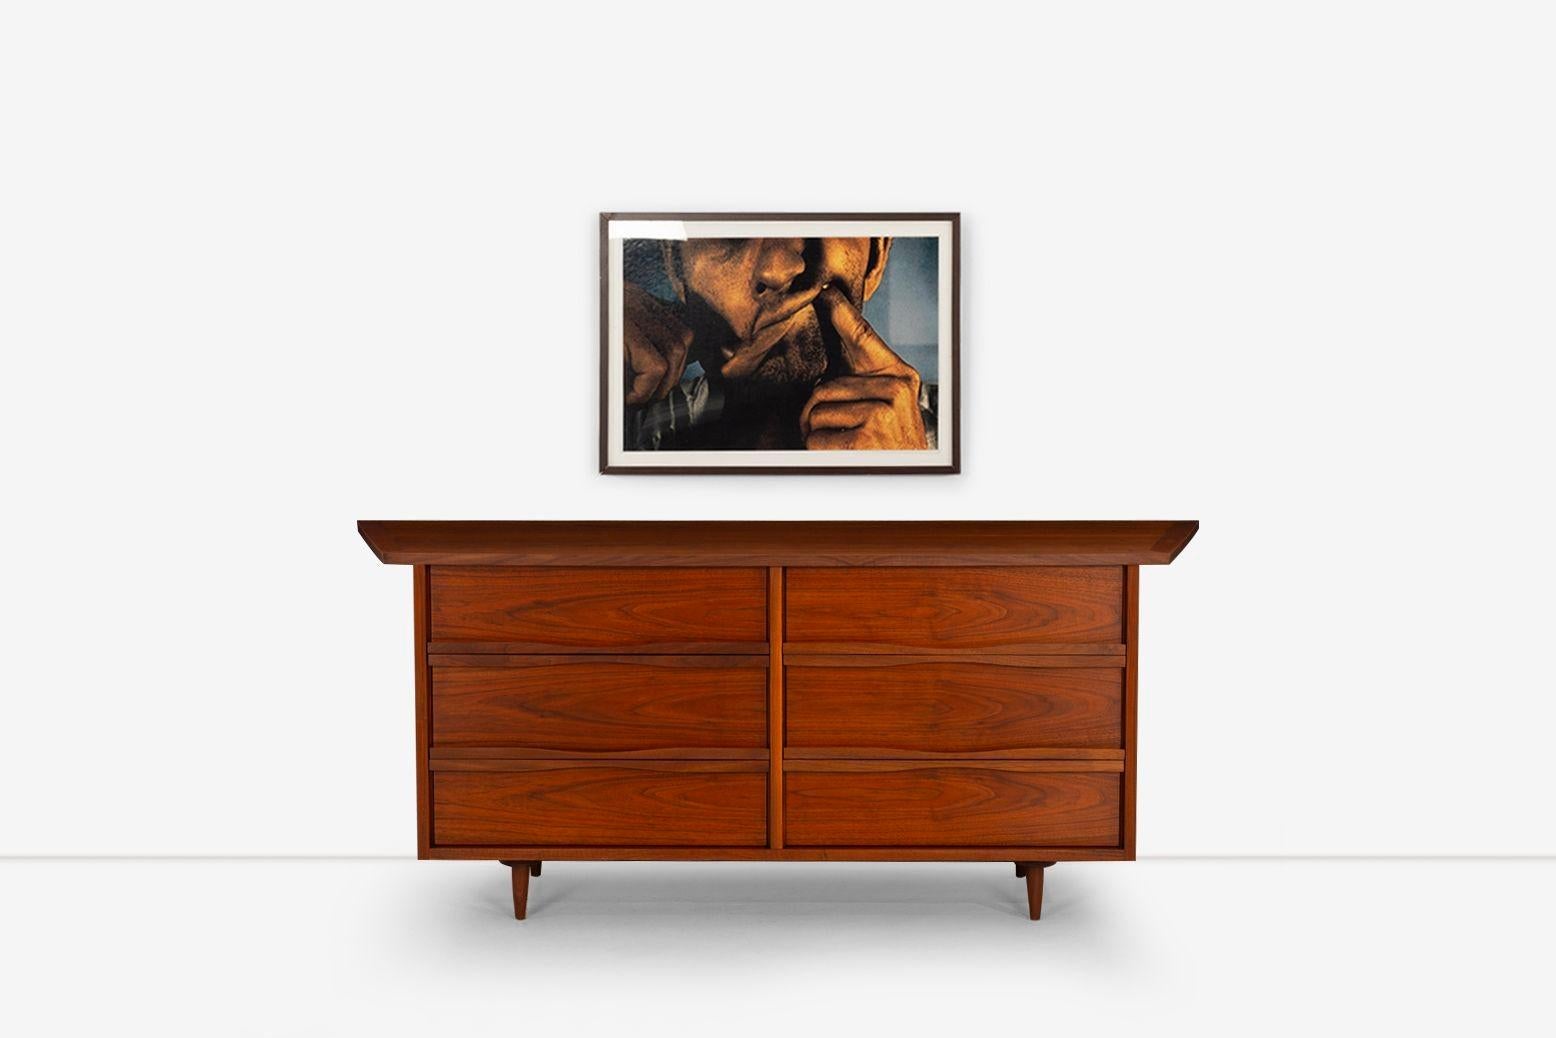 Nakashima Dresser for Widdicomb Orgins Line in walnut wood with oil finish, The angeled One inch-thick top overhangs a six-drawer case with carved horizontal handles. Solid-turned walnut legs
Incised 